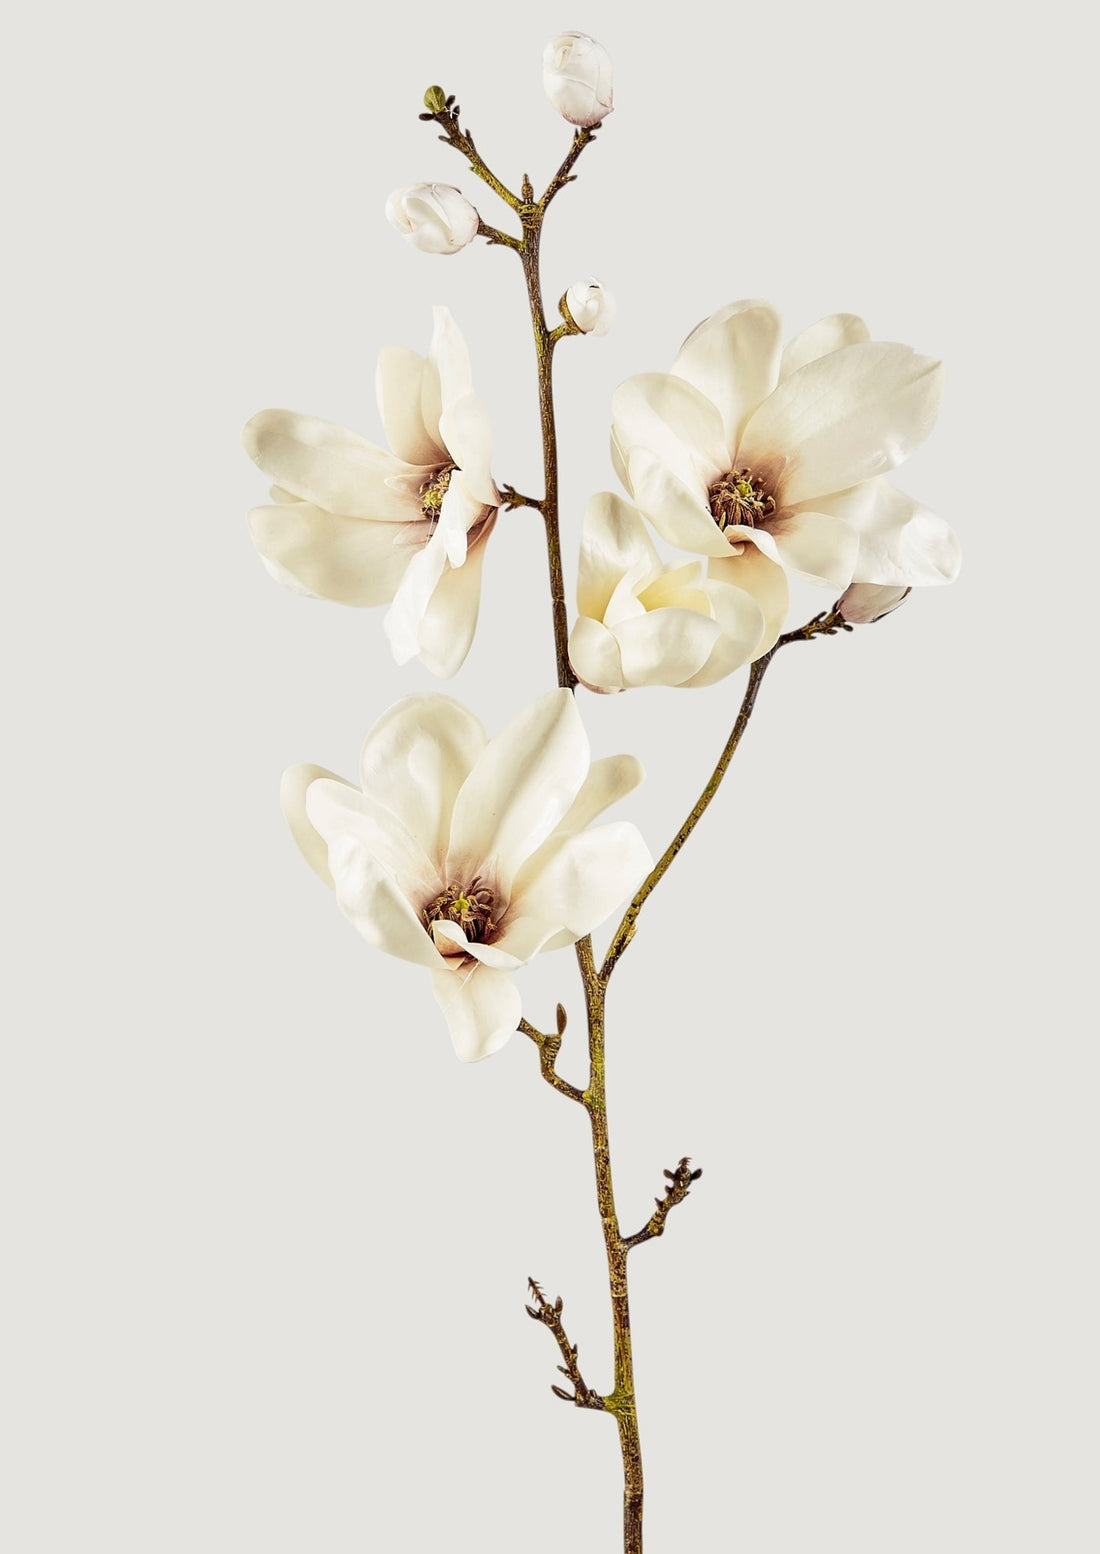 Afloral Luxury Faux Blooming Flowers Cream Magnolia Branch